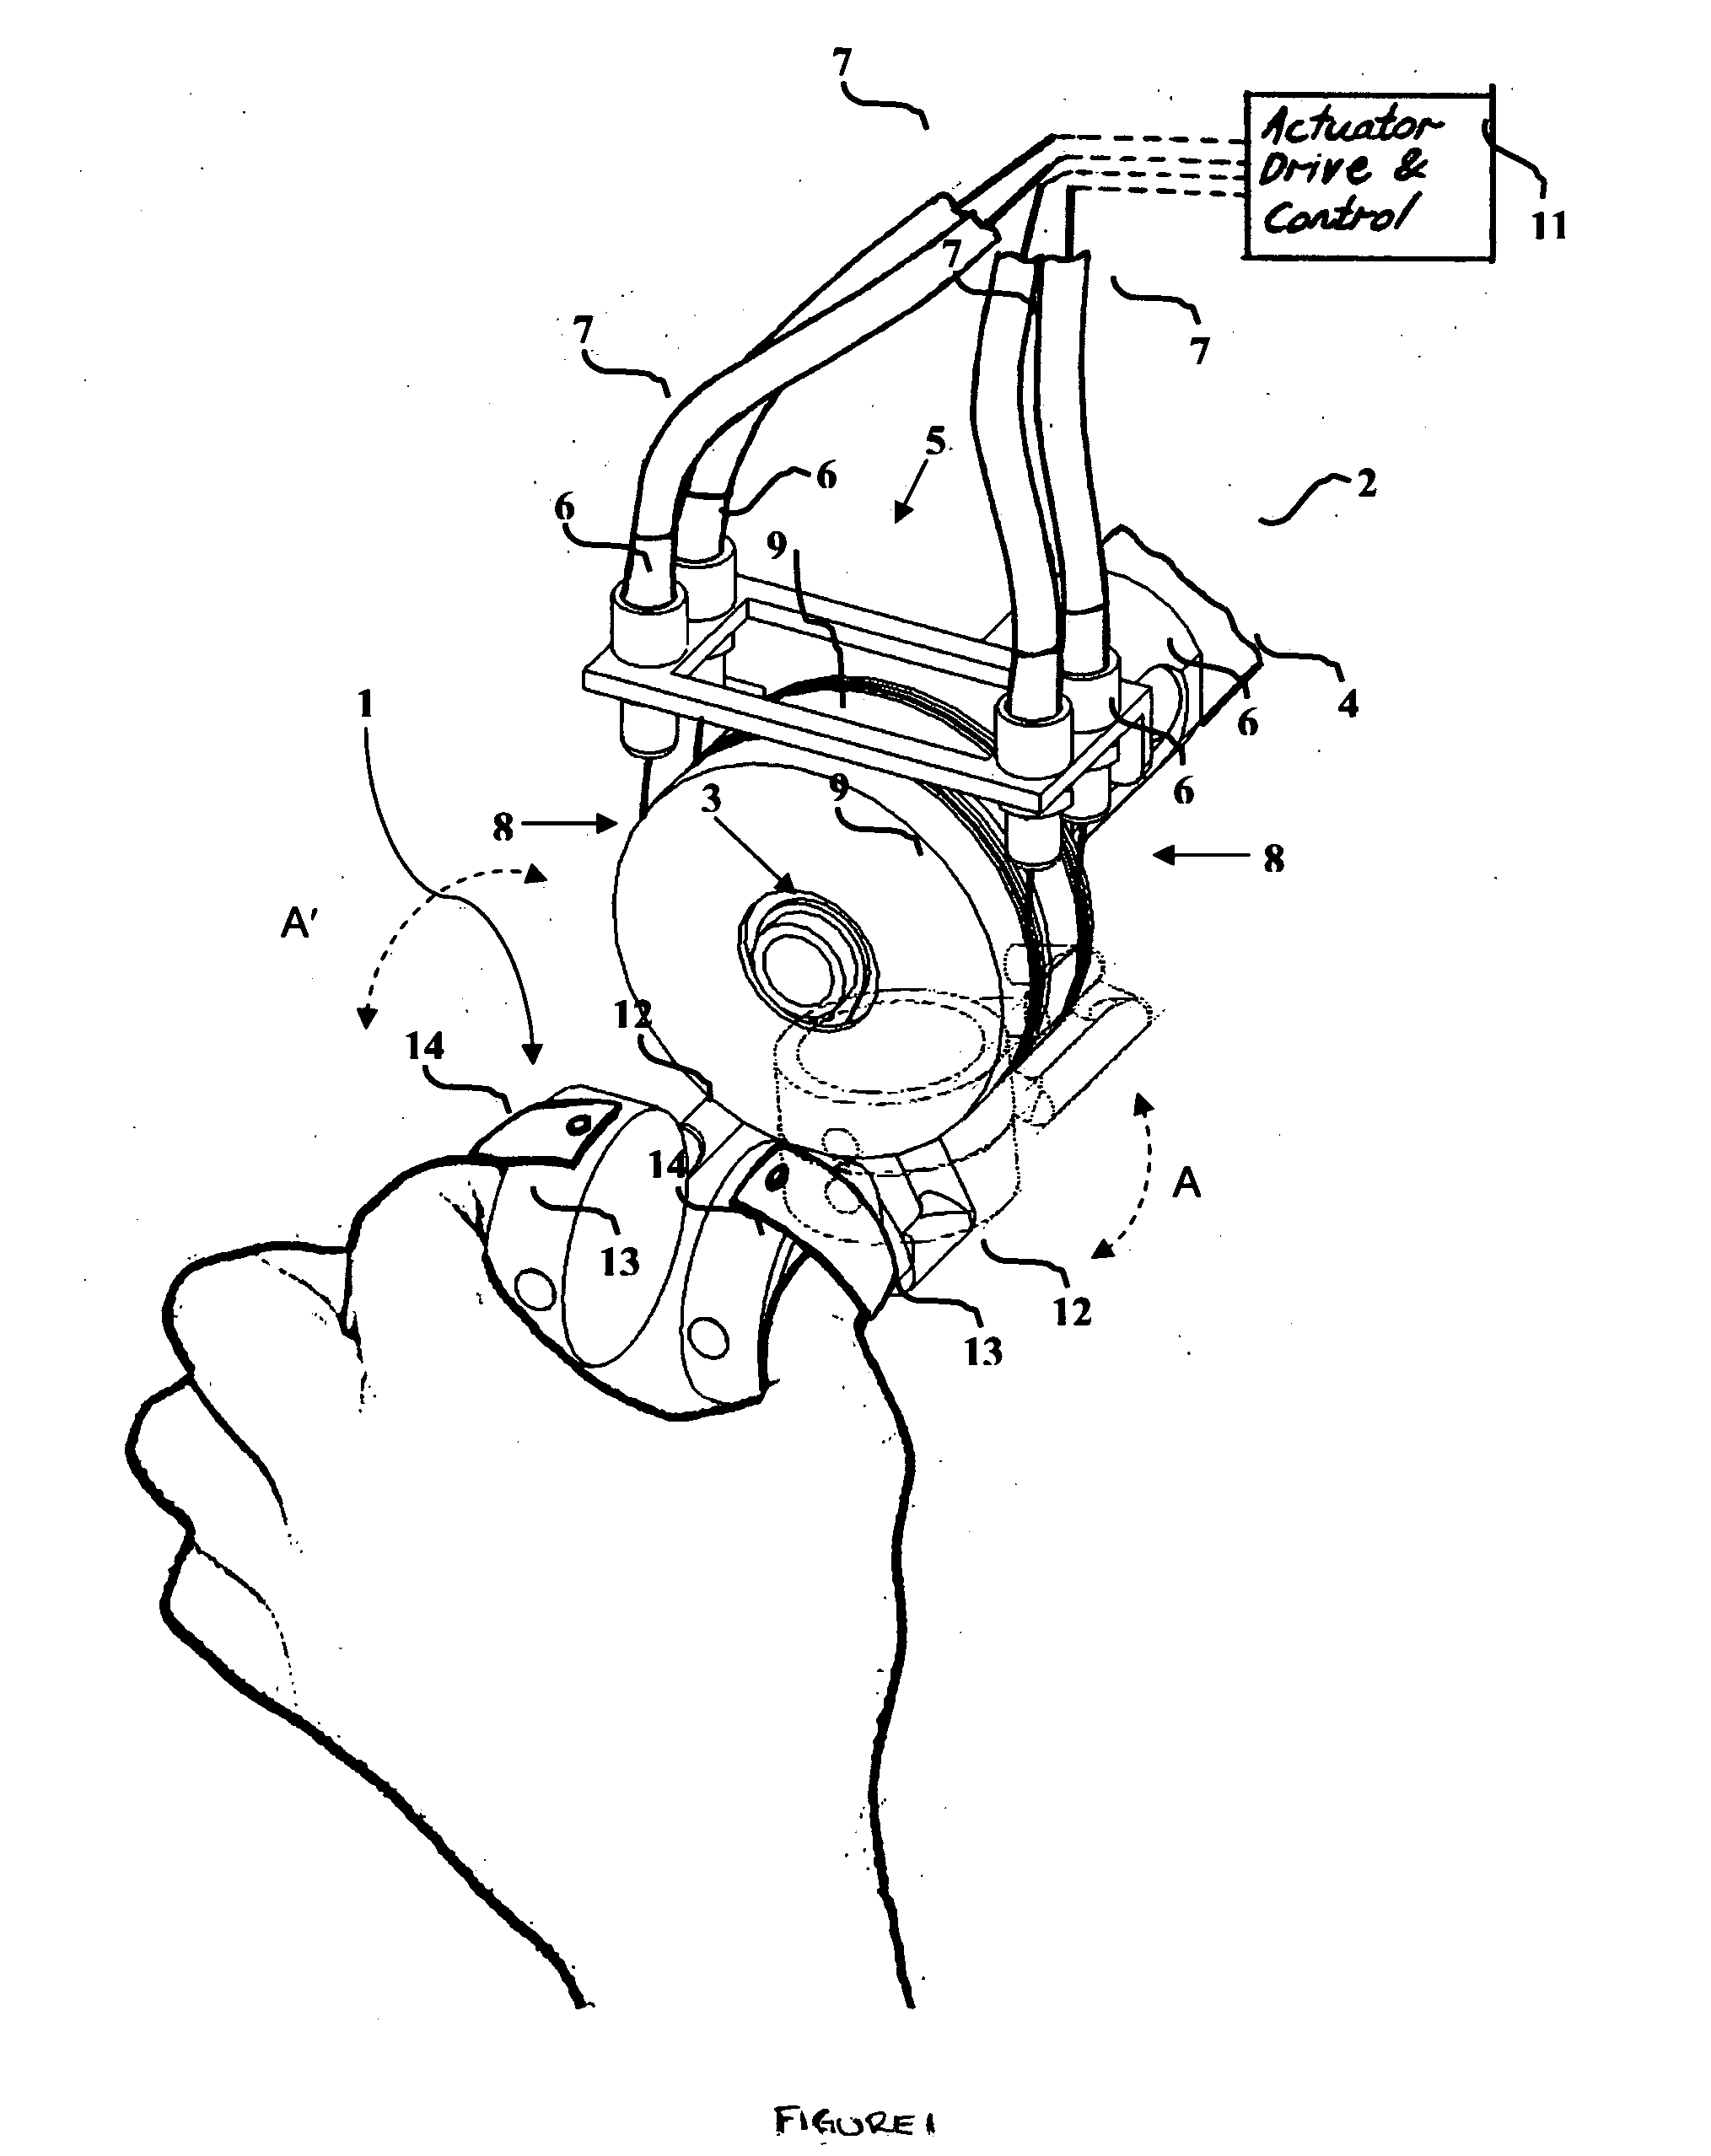 Method and apparatus for haptic control